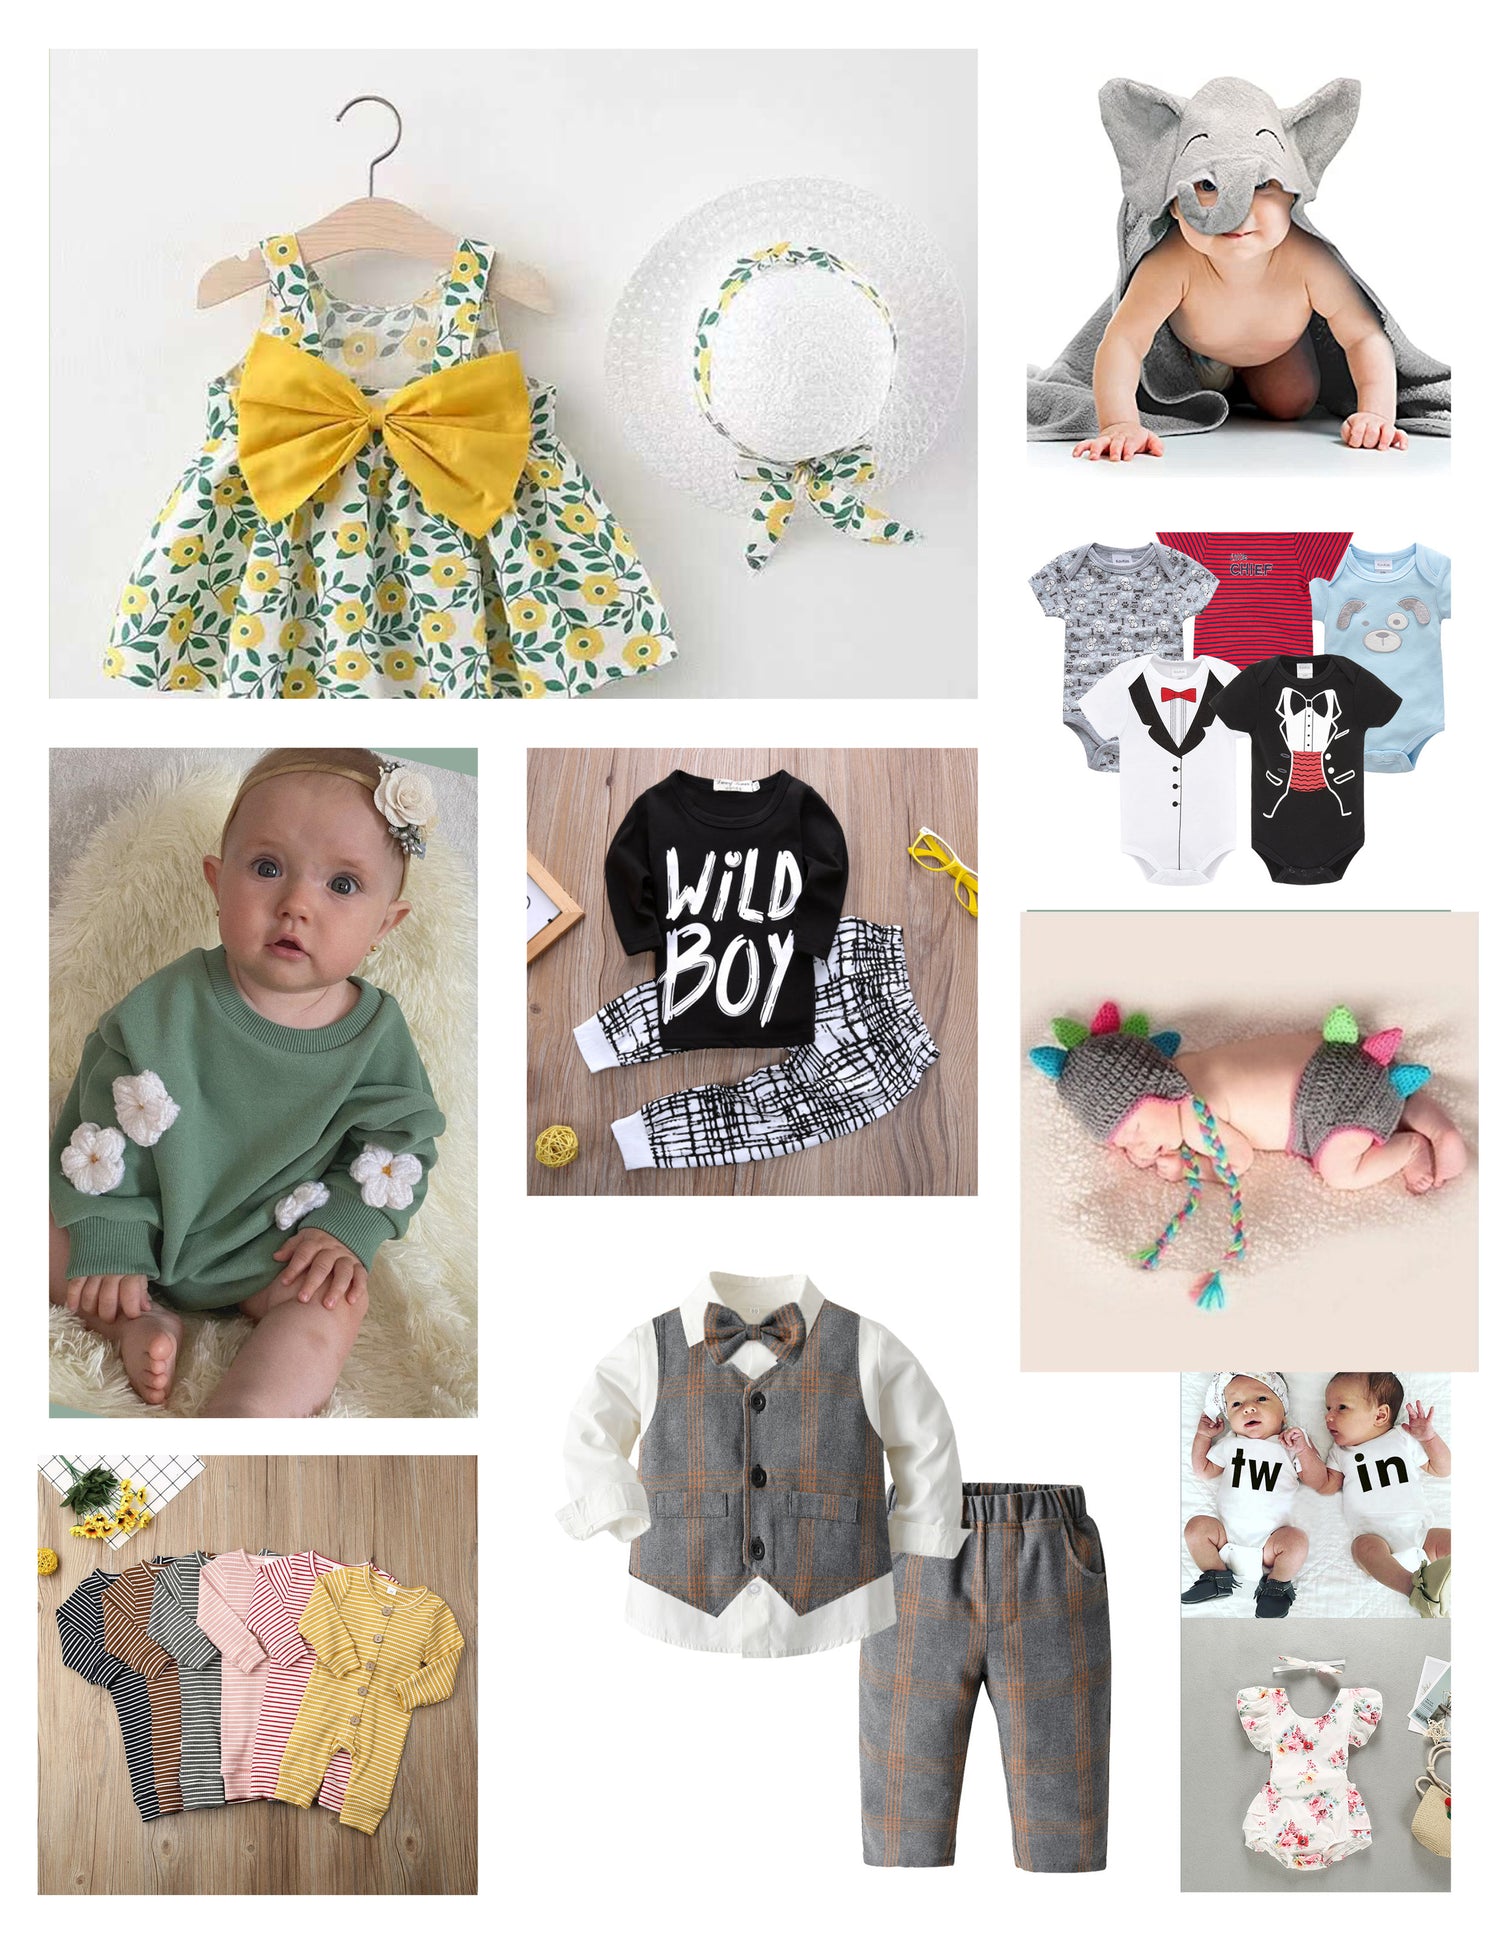 Baby Clothes : Newborn, Infant, Toddler Apparel